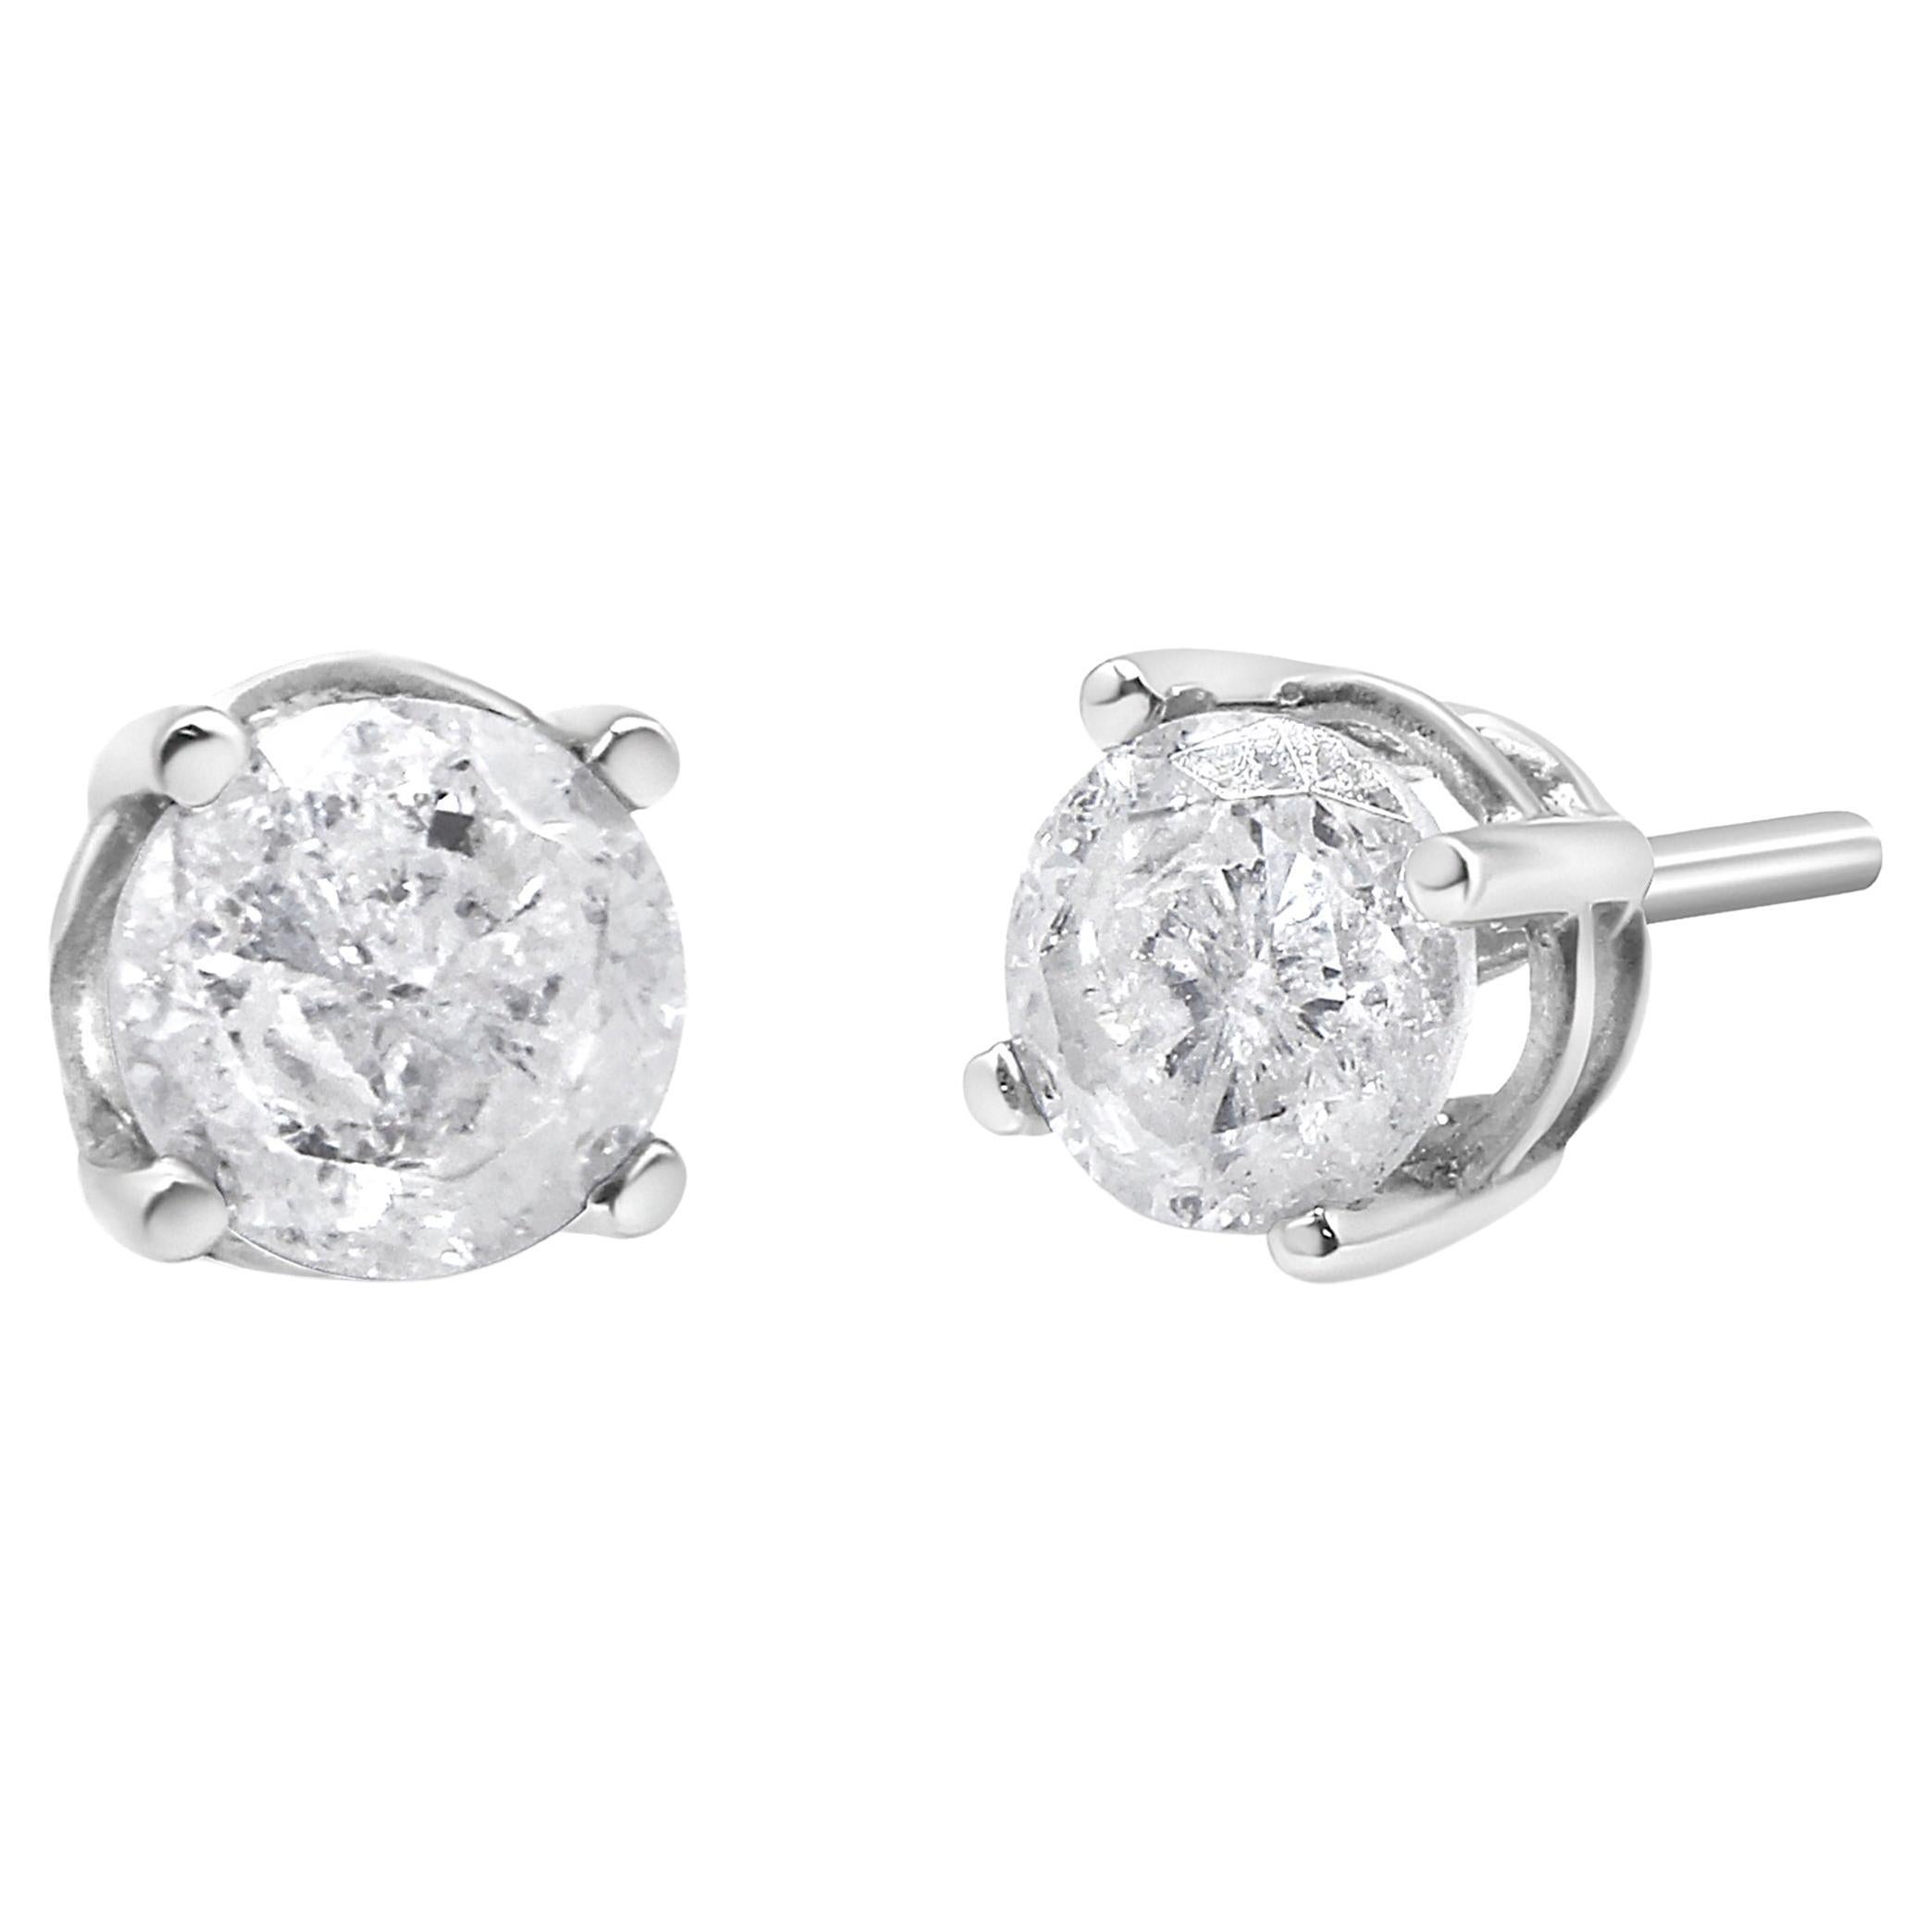 A classic design for a classic woman, these silver studs are the perfect piece for the modern, everyday woman. Crafted in genuine .925 sterling silver, and plated with rhodium (a platinum-family metal) for a lifetime of tarnish-free wear, these